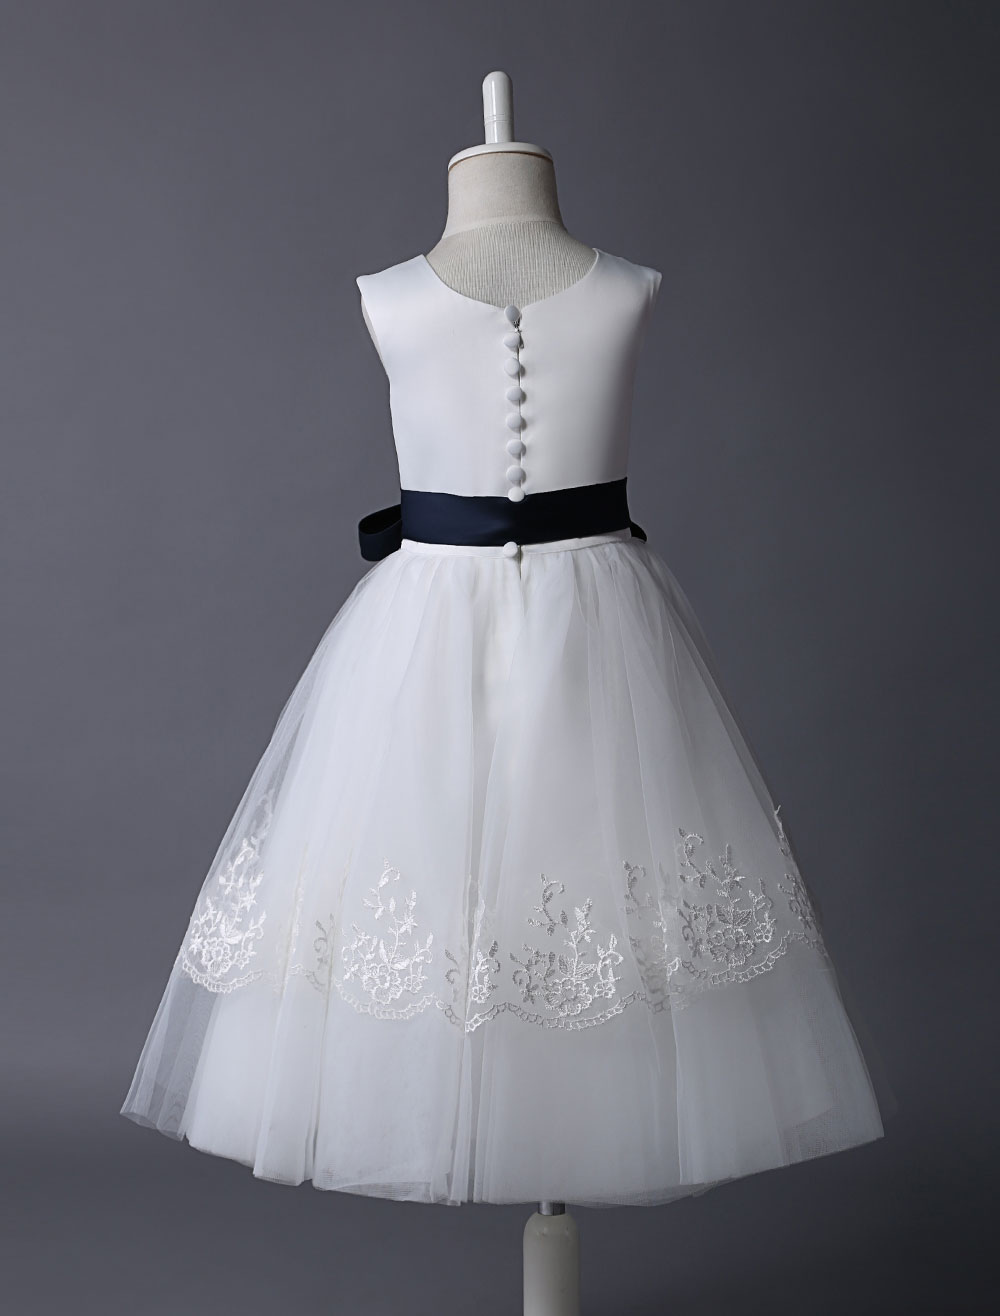 Ivory Tulle Flower Girl Dress With Lace Applique And Navy Blue Sash ...